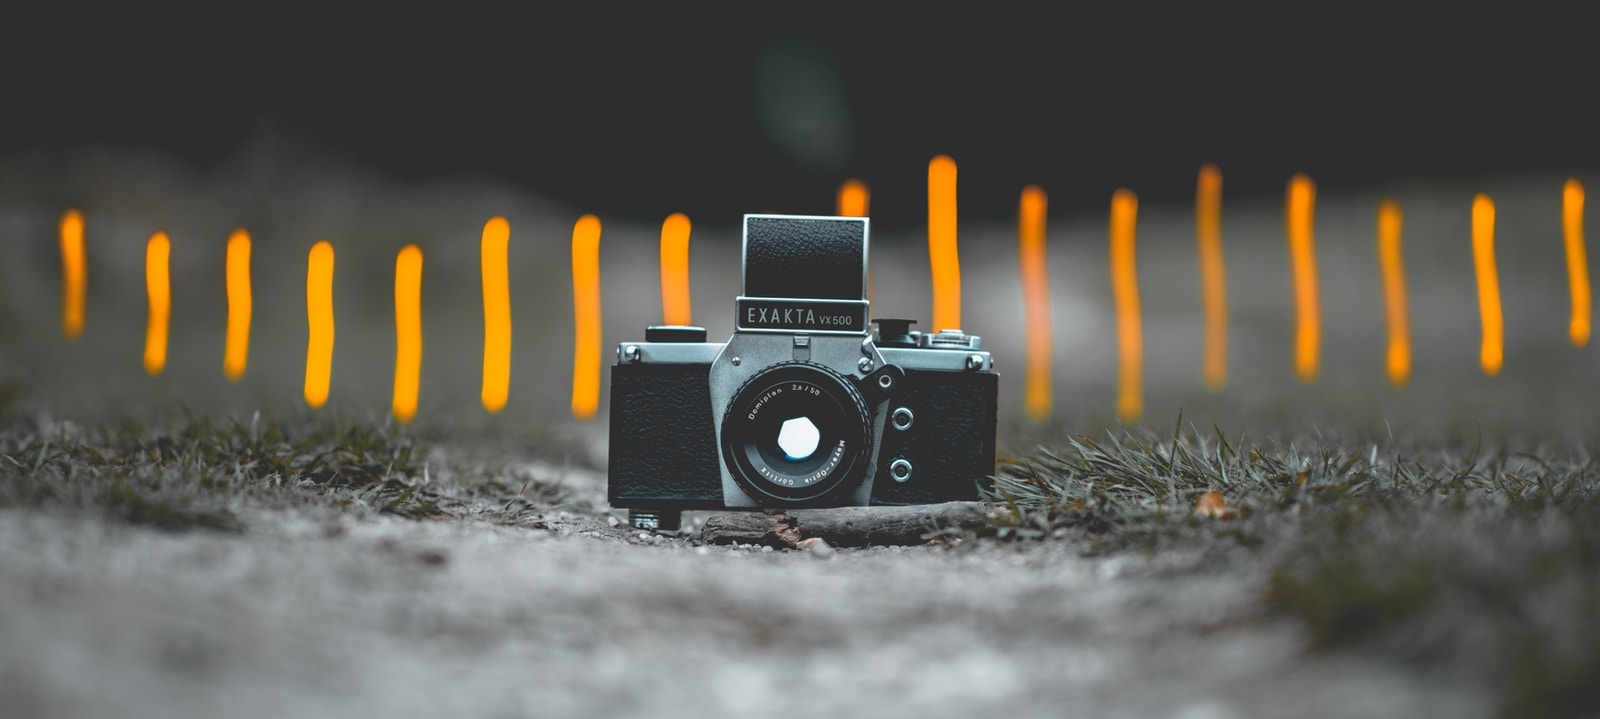 selective focus photography of black and gray SLR camera on gorund